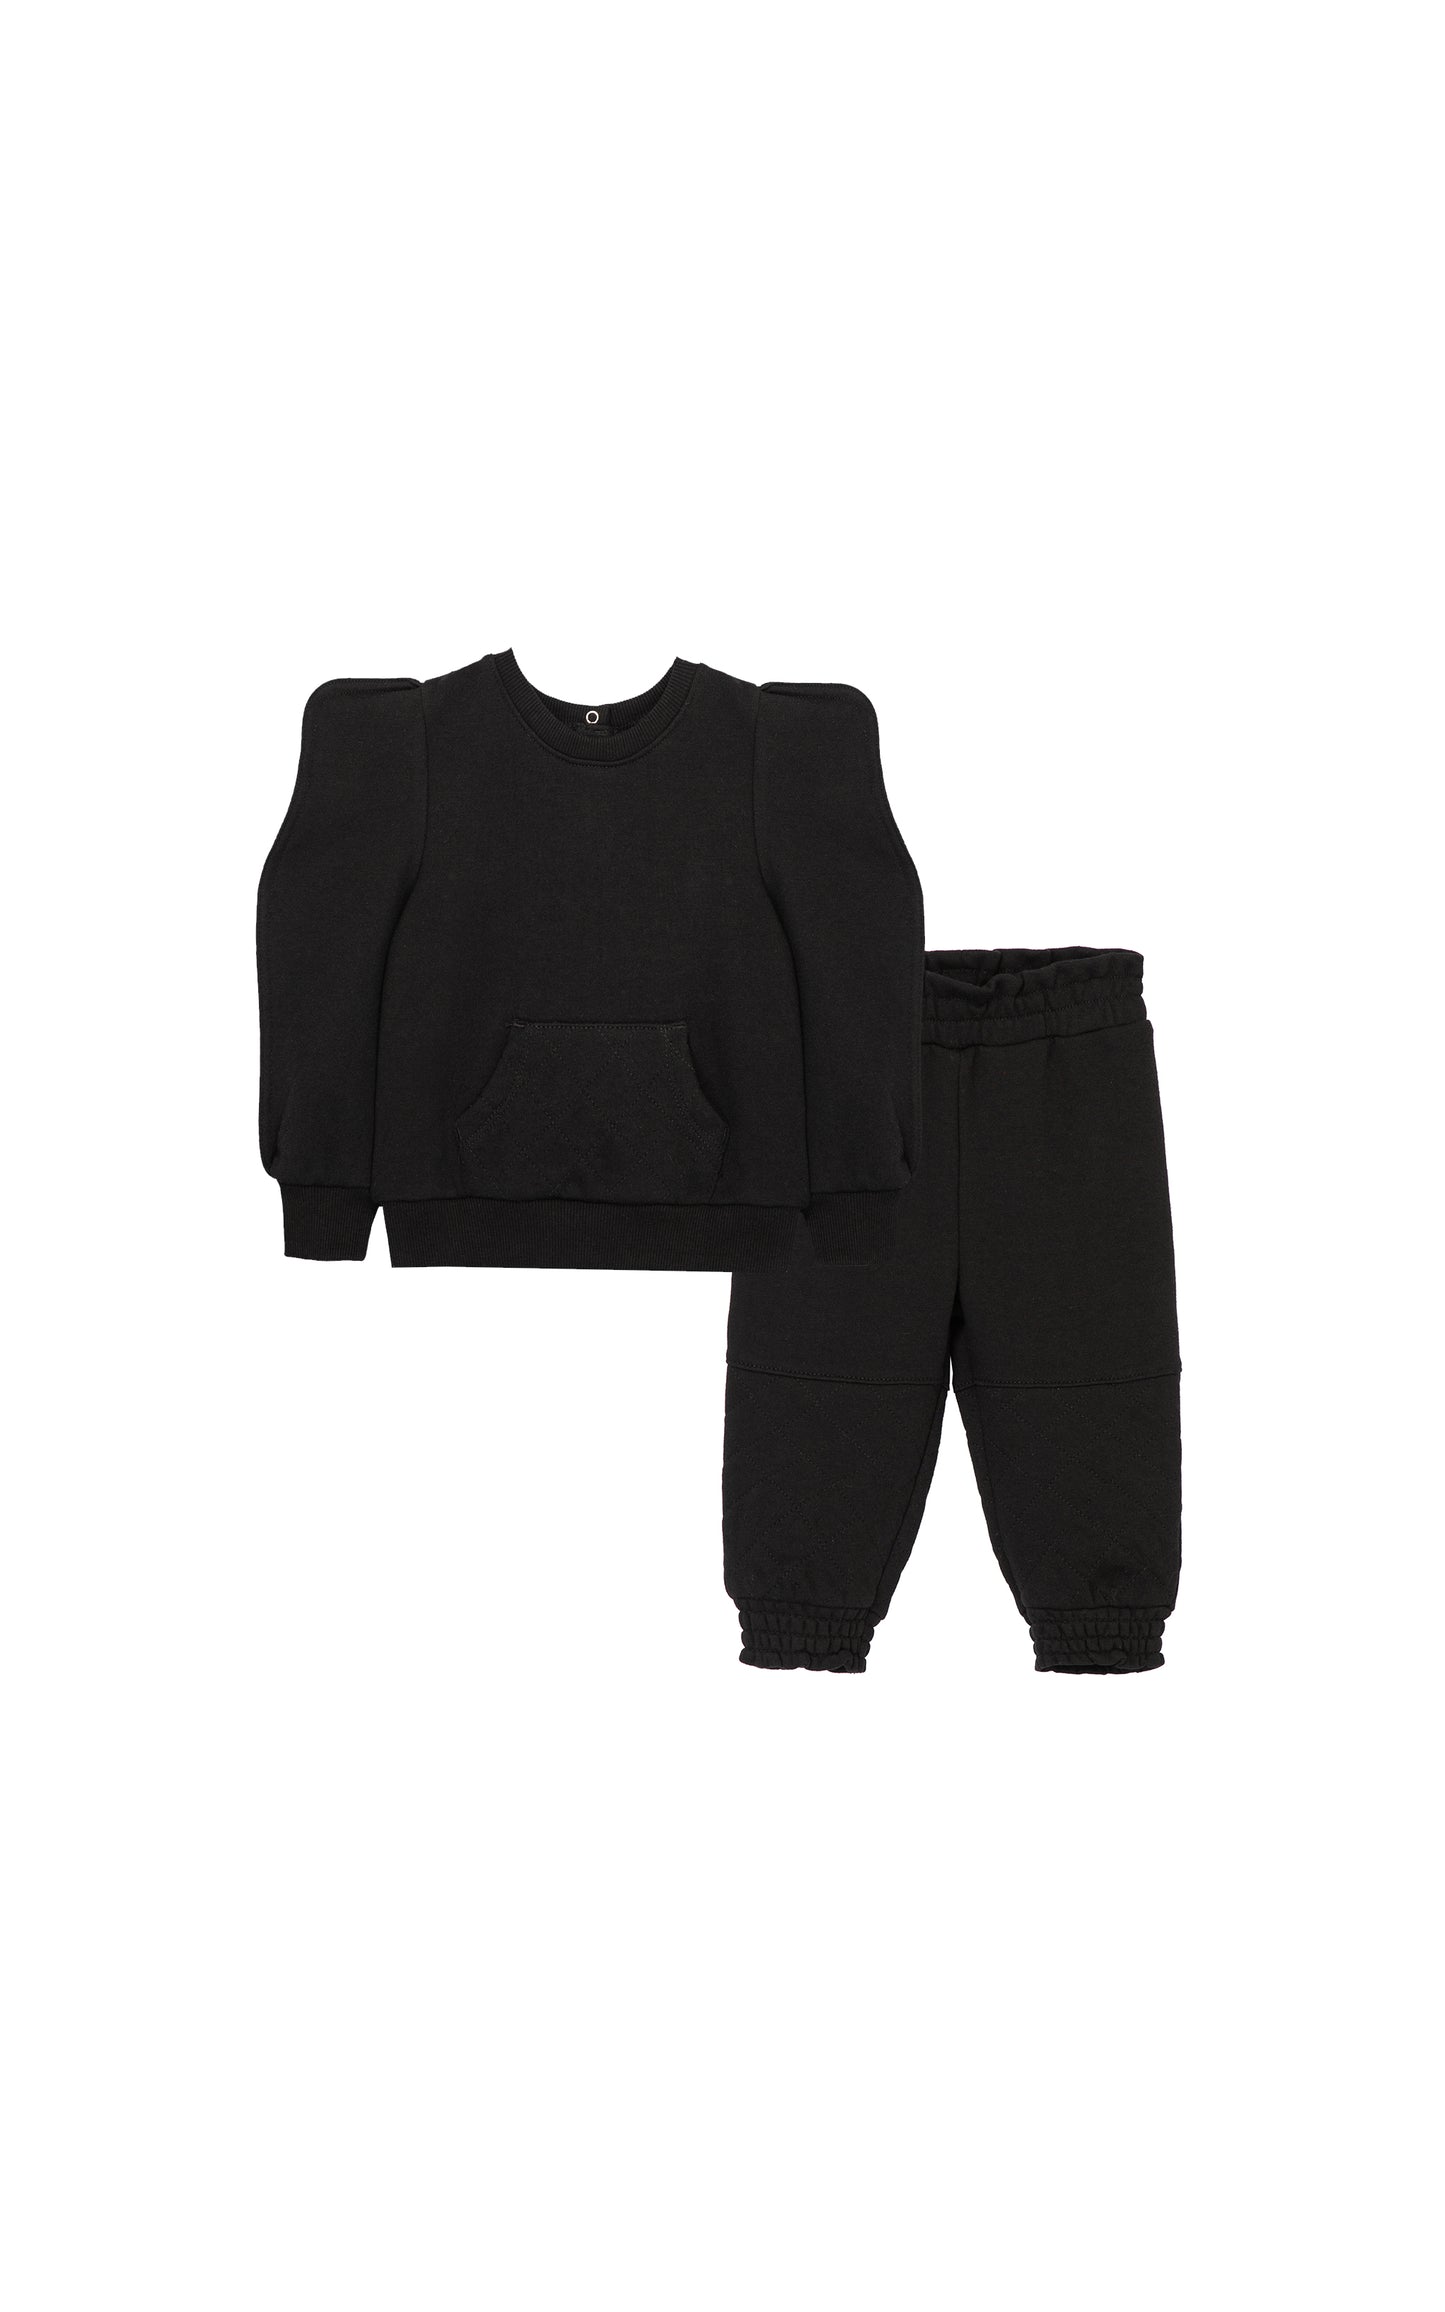 BLACK FRENCH TERRY TOP WITH WAVY SLEEVES AND QUILTED KANGAROO POCKET. PAIRED WITH A MATCHING PULL-ON JOGGER.